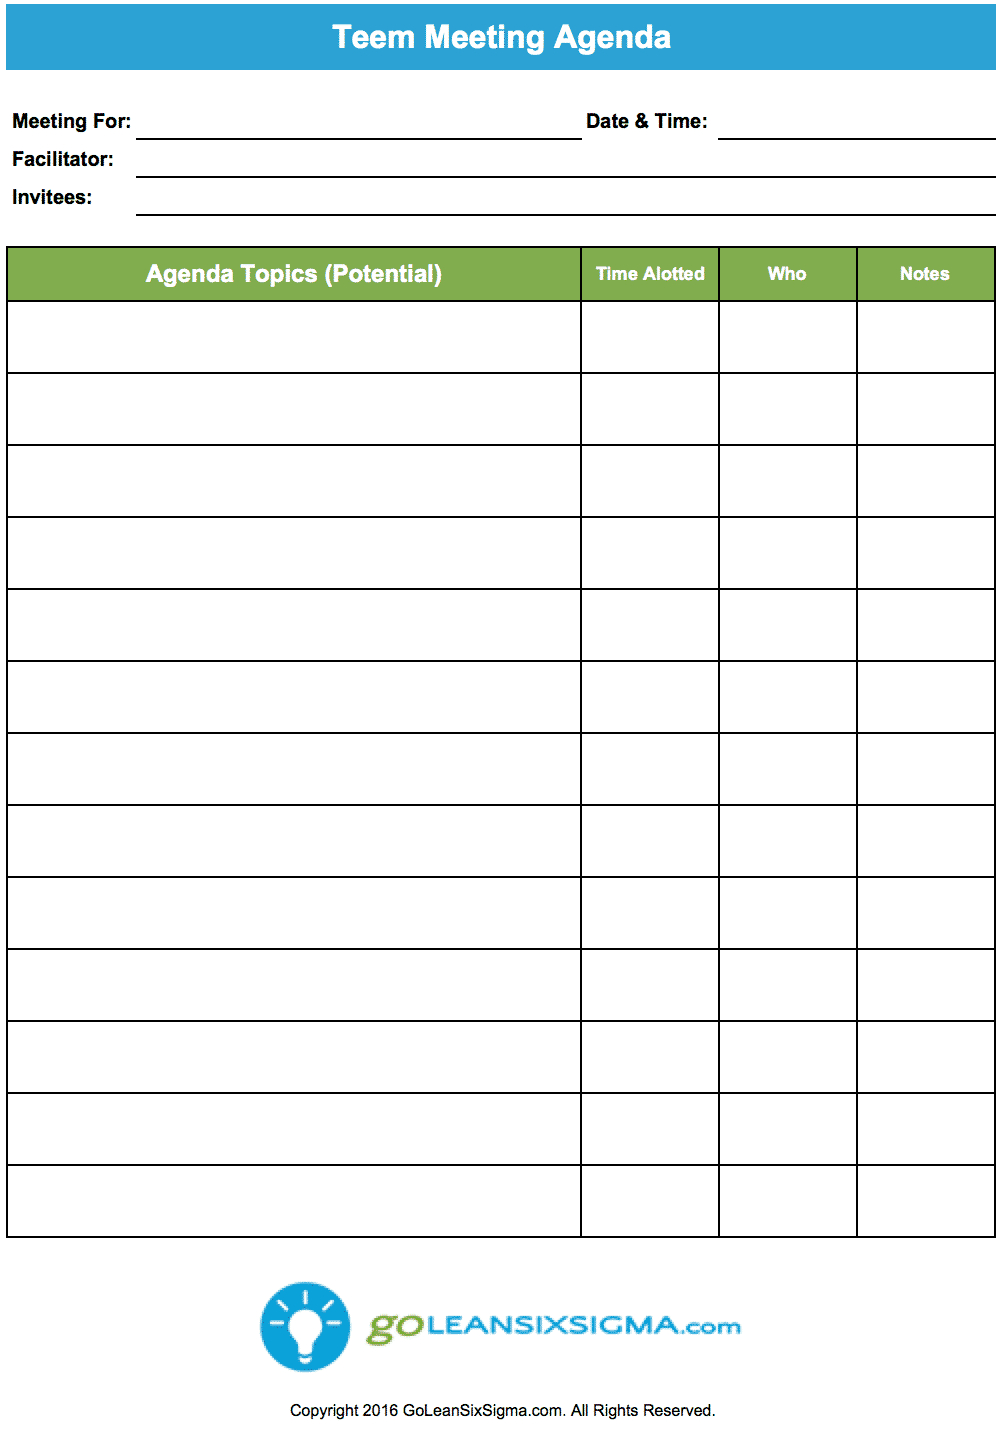 Team Meeting Agenda Goleansixsigma With Meeting Note Template